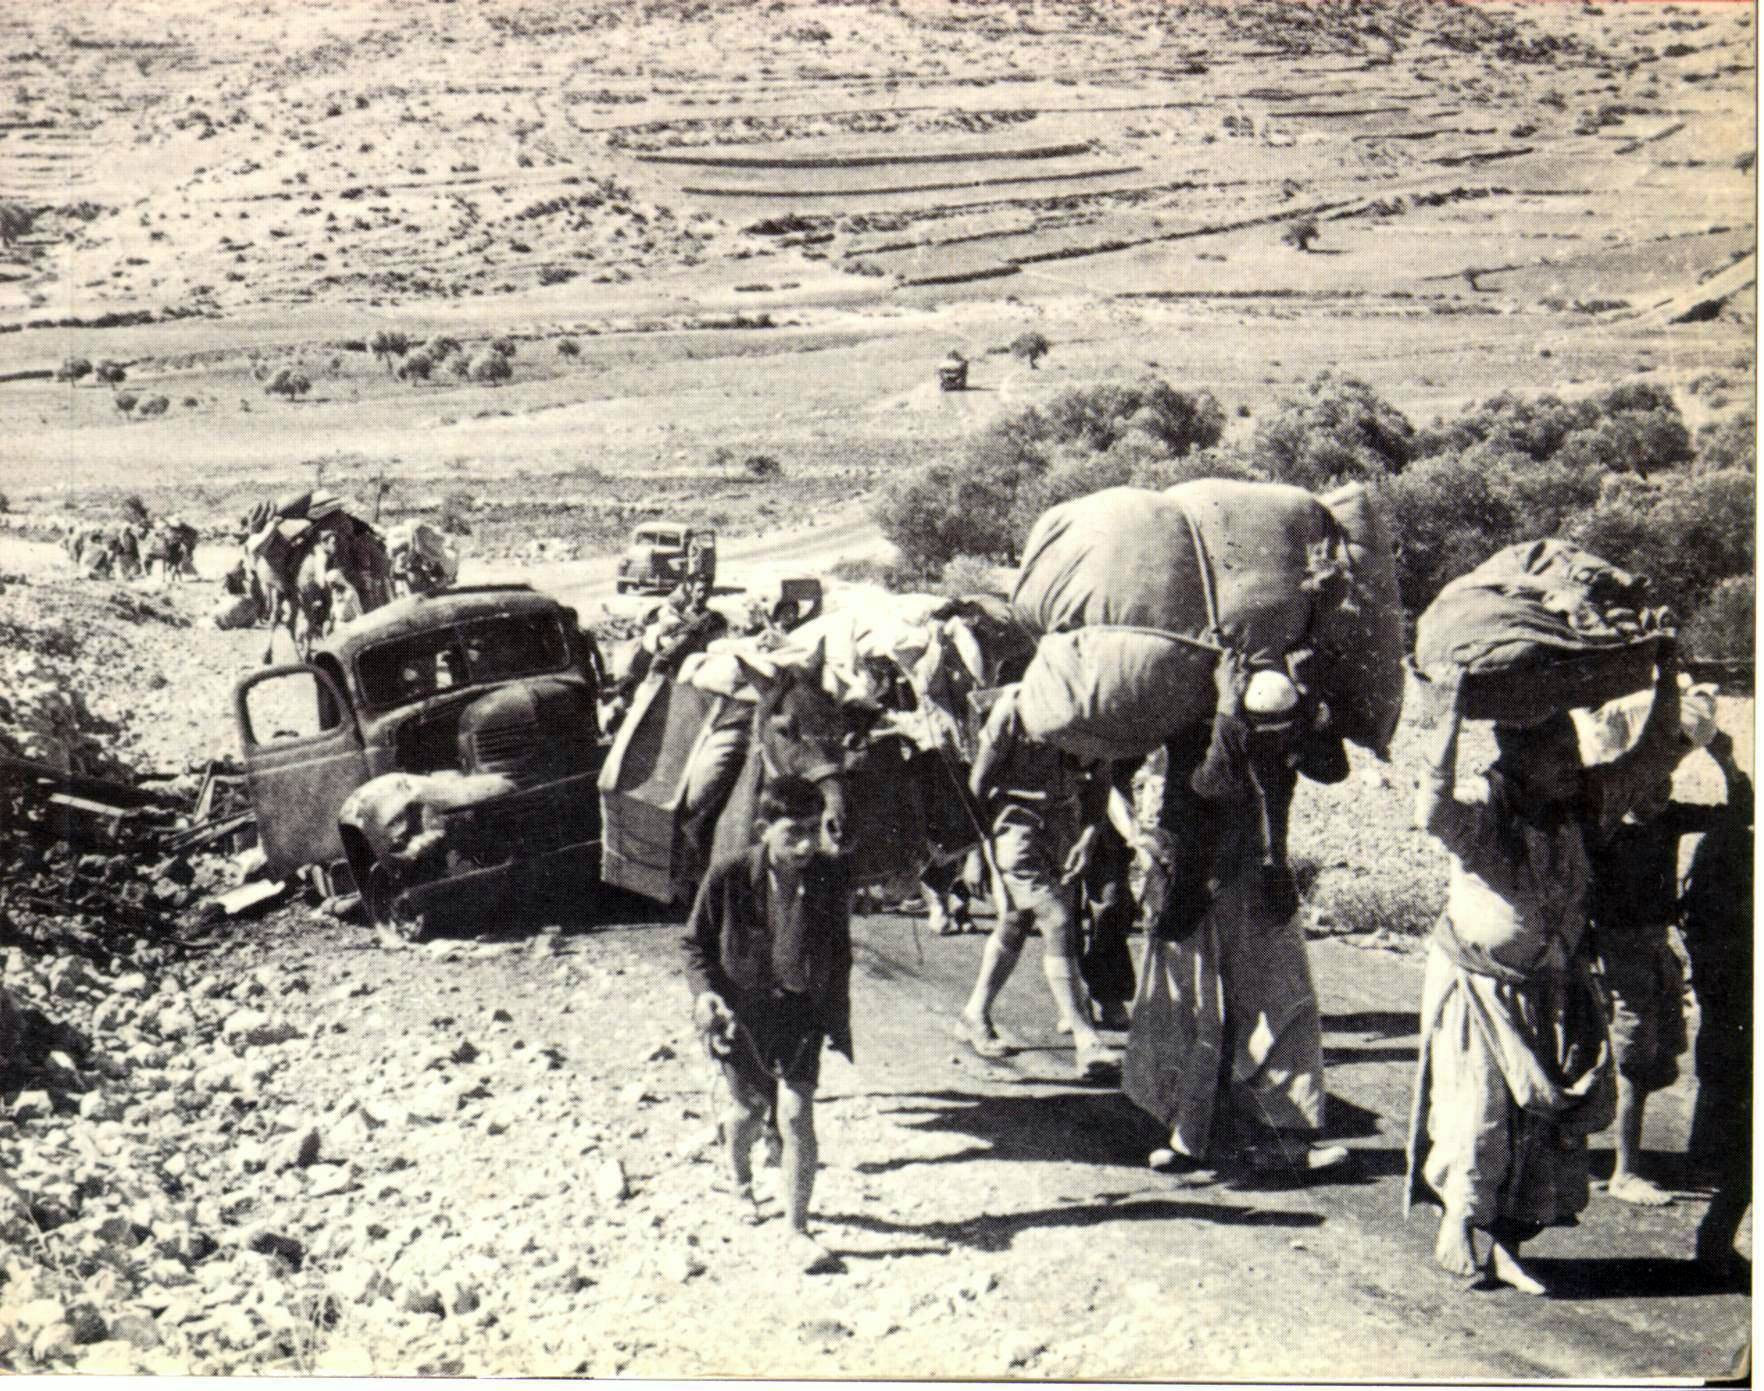 UN Agency: Palestinian Refugees Subjected to Violence and Injustice for 7 Decades